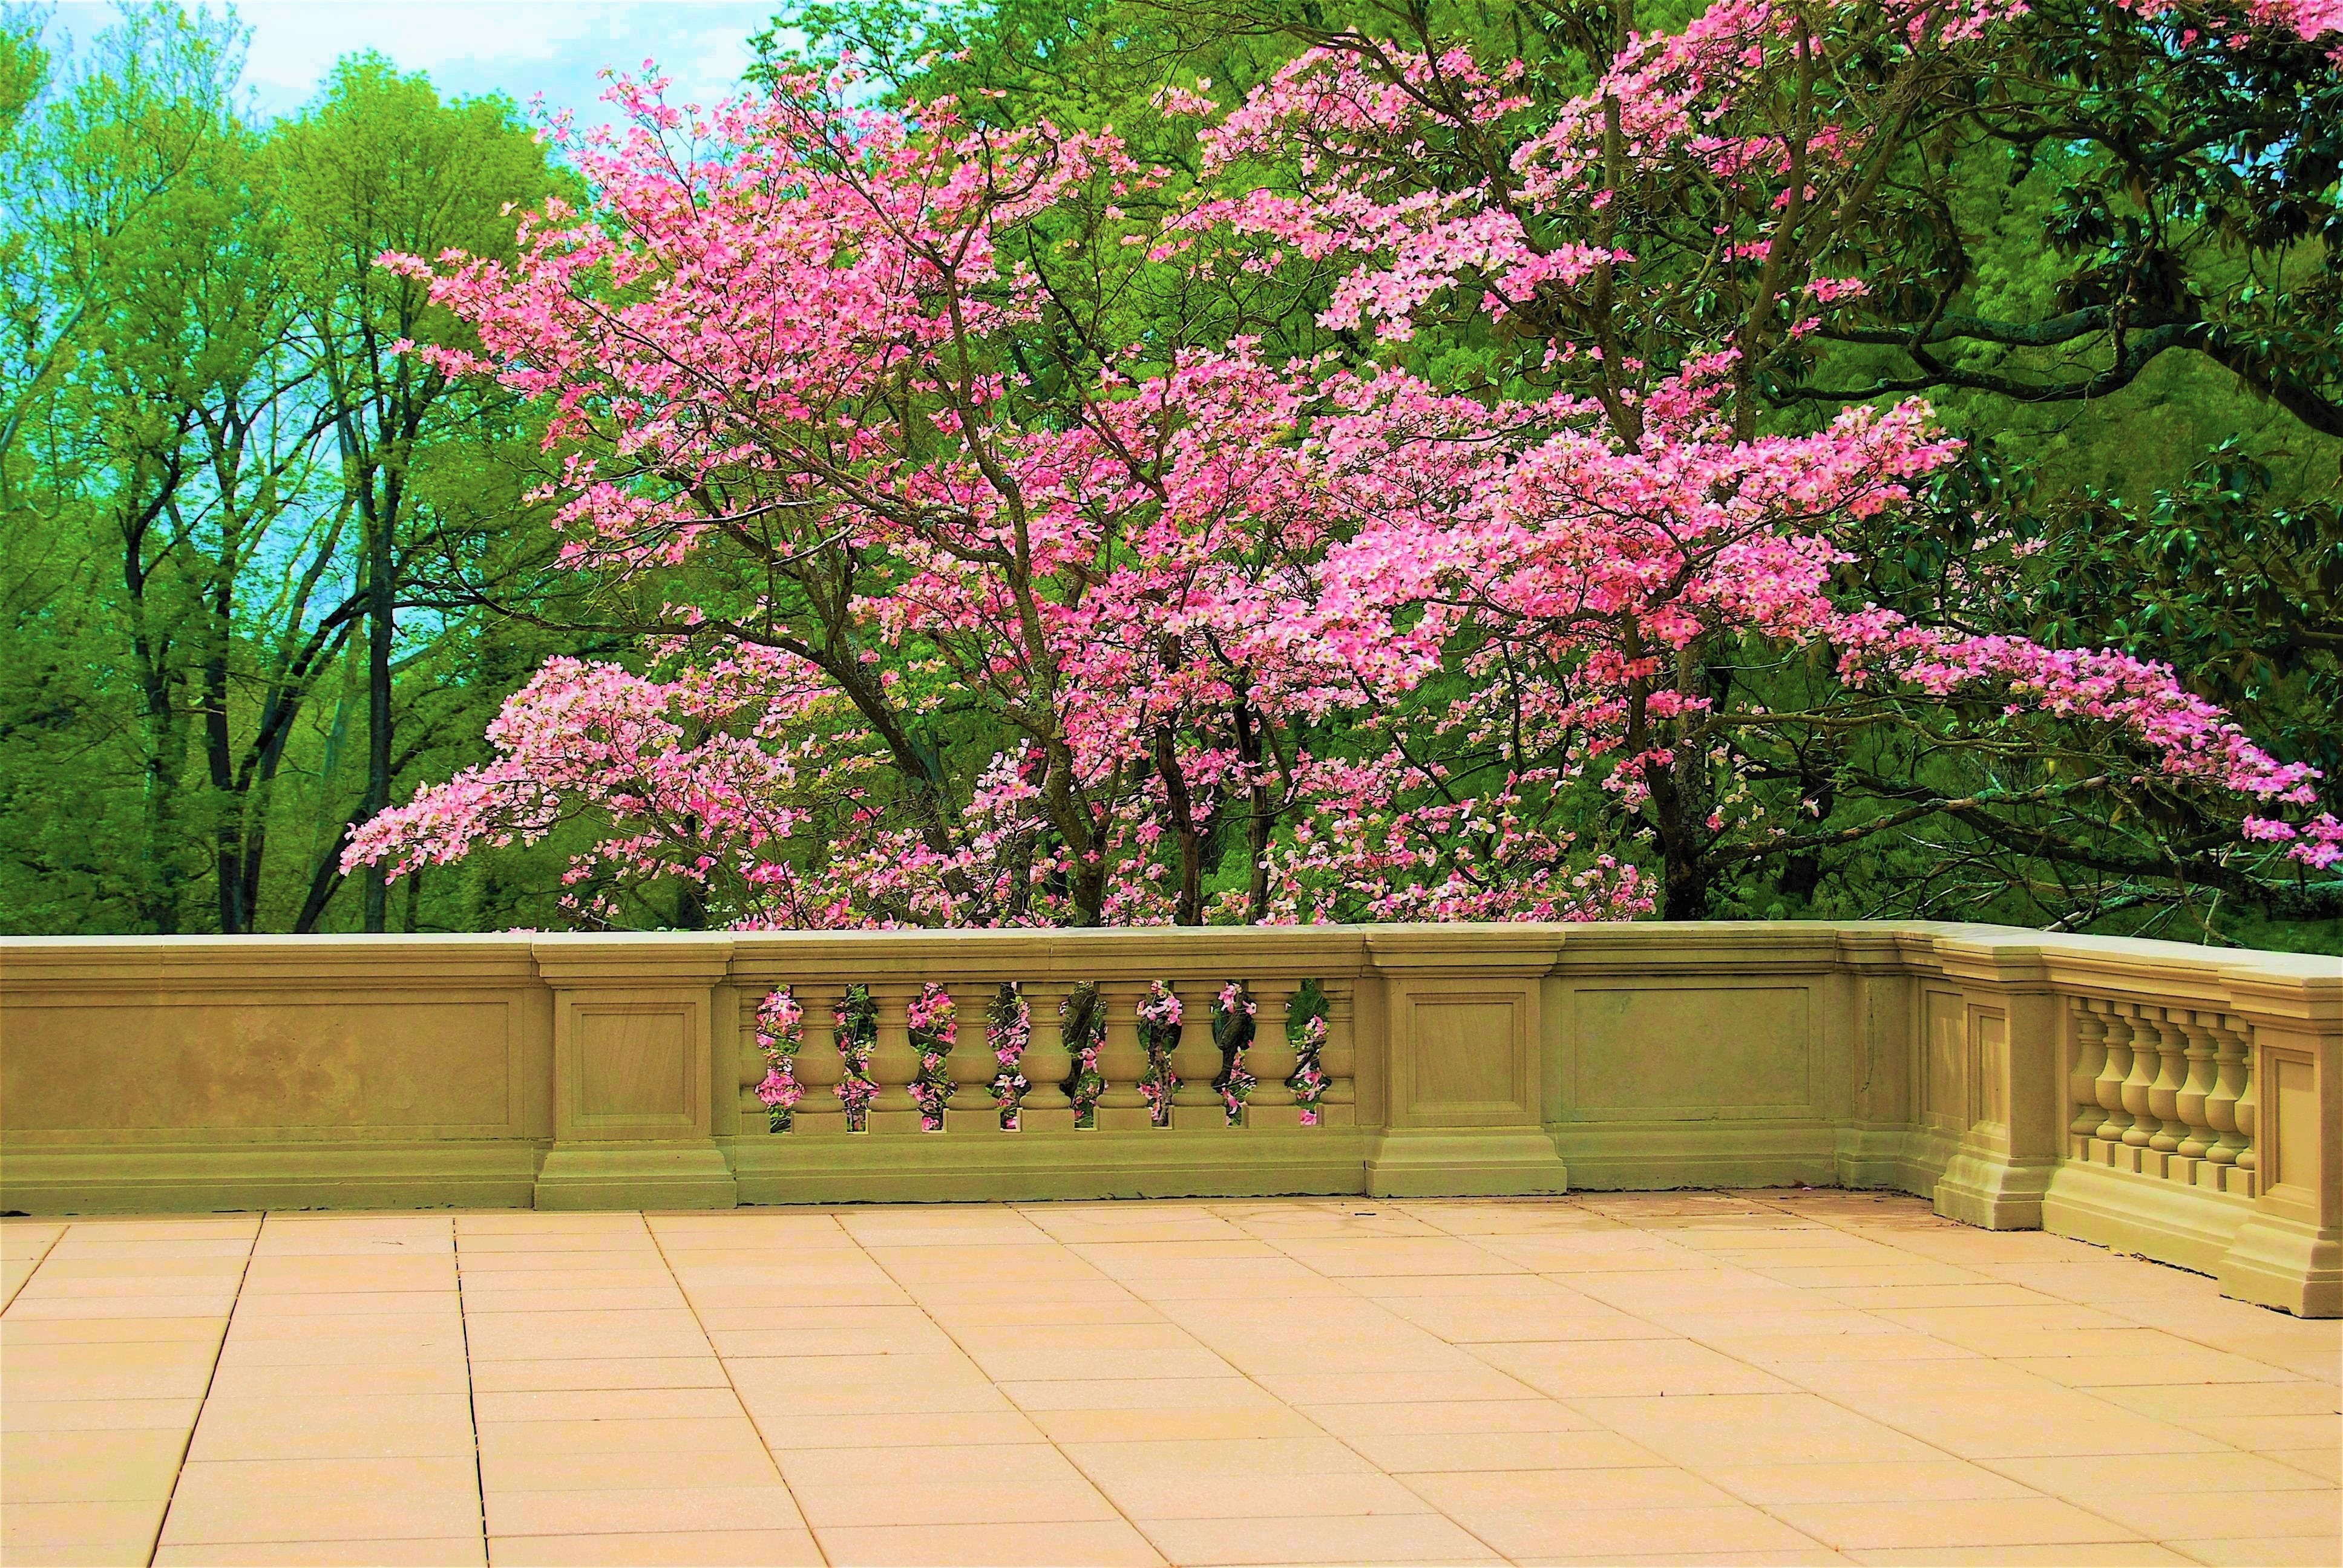 blossom, earth, spring, courtyard, pink flower, tree